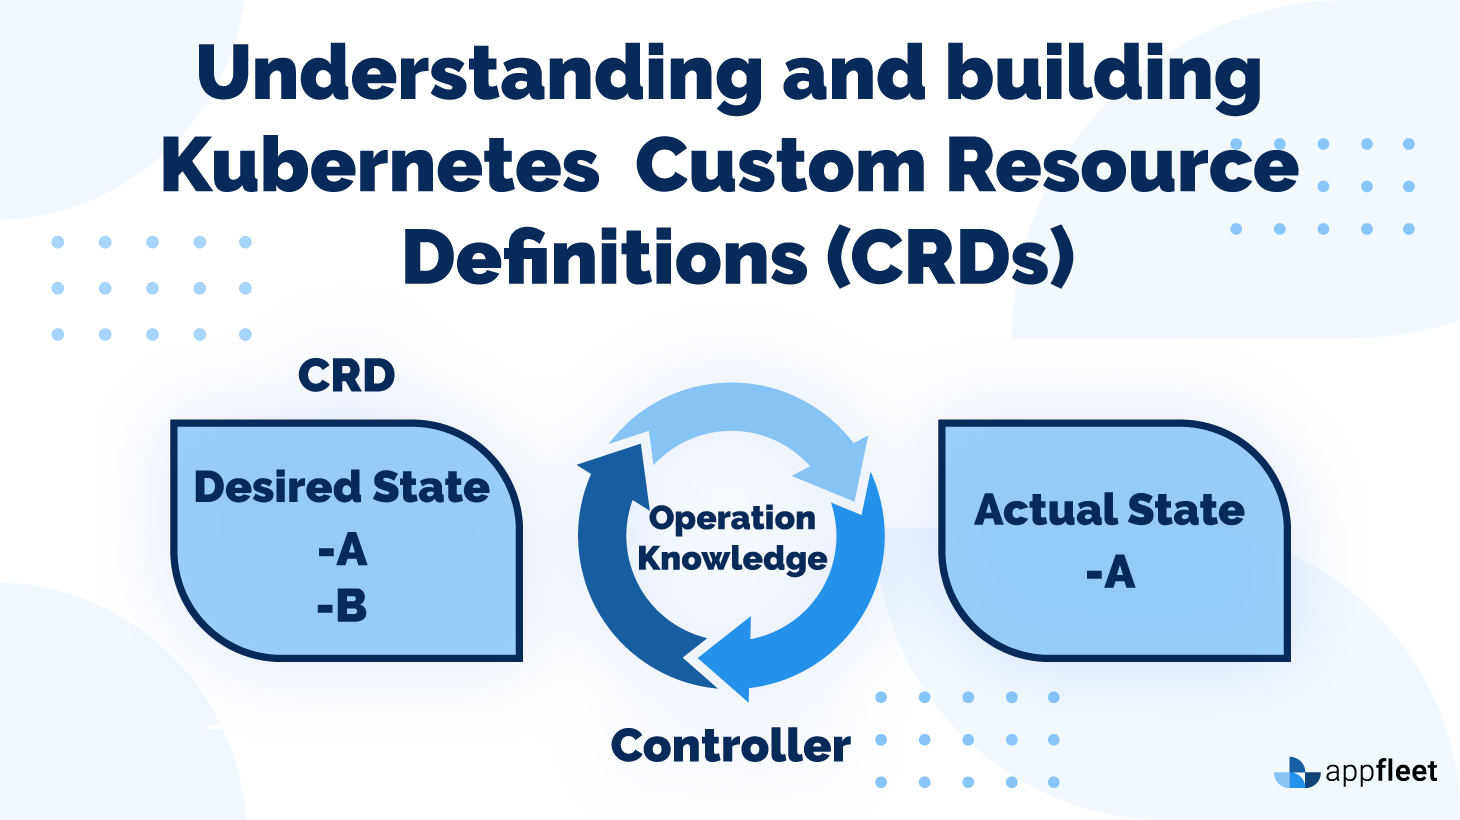 Understanding and building Kubernetes Custom Resource Definitions (CRDs)